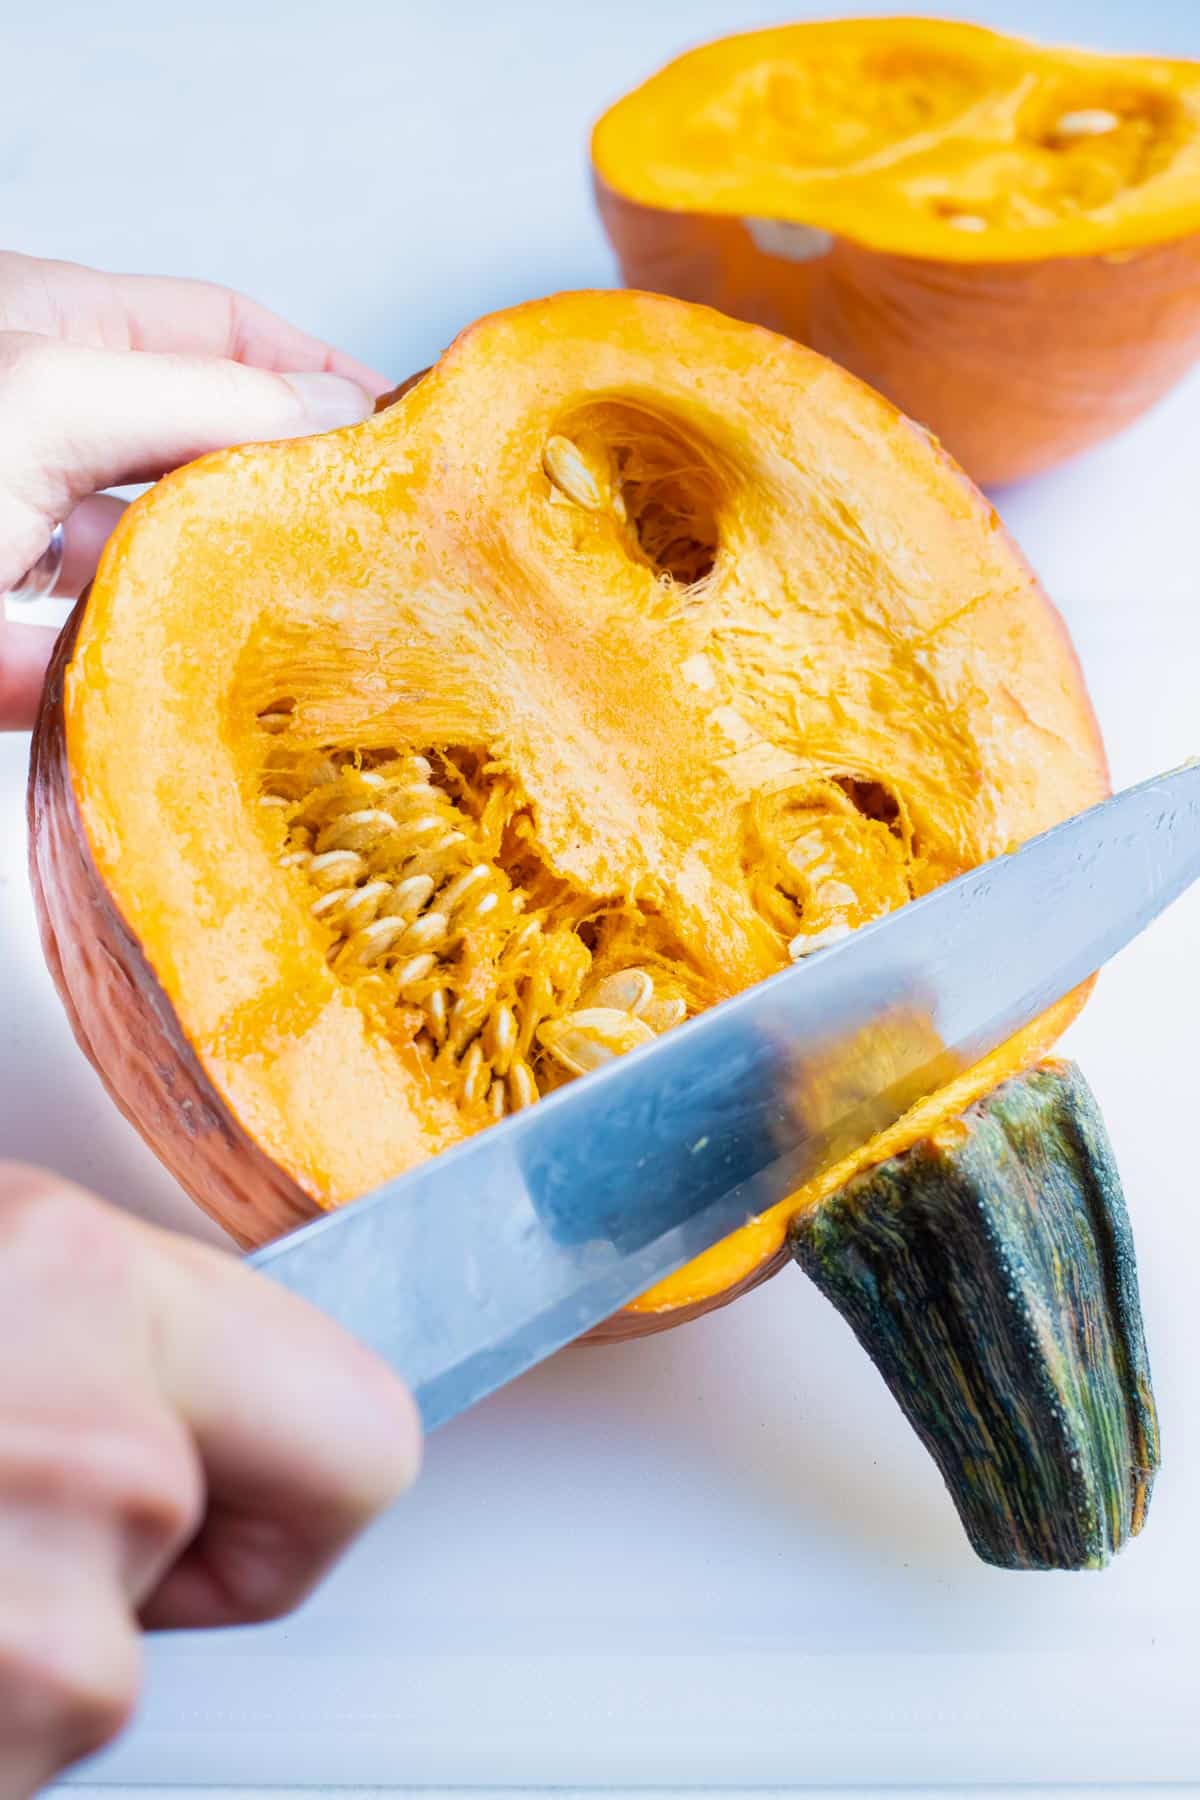 A knife is used to make an incision at the pumpkin stem.